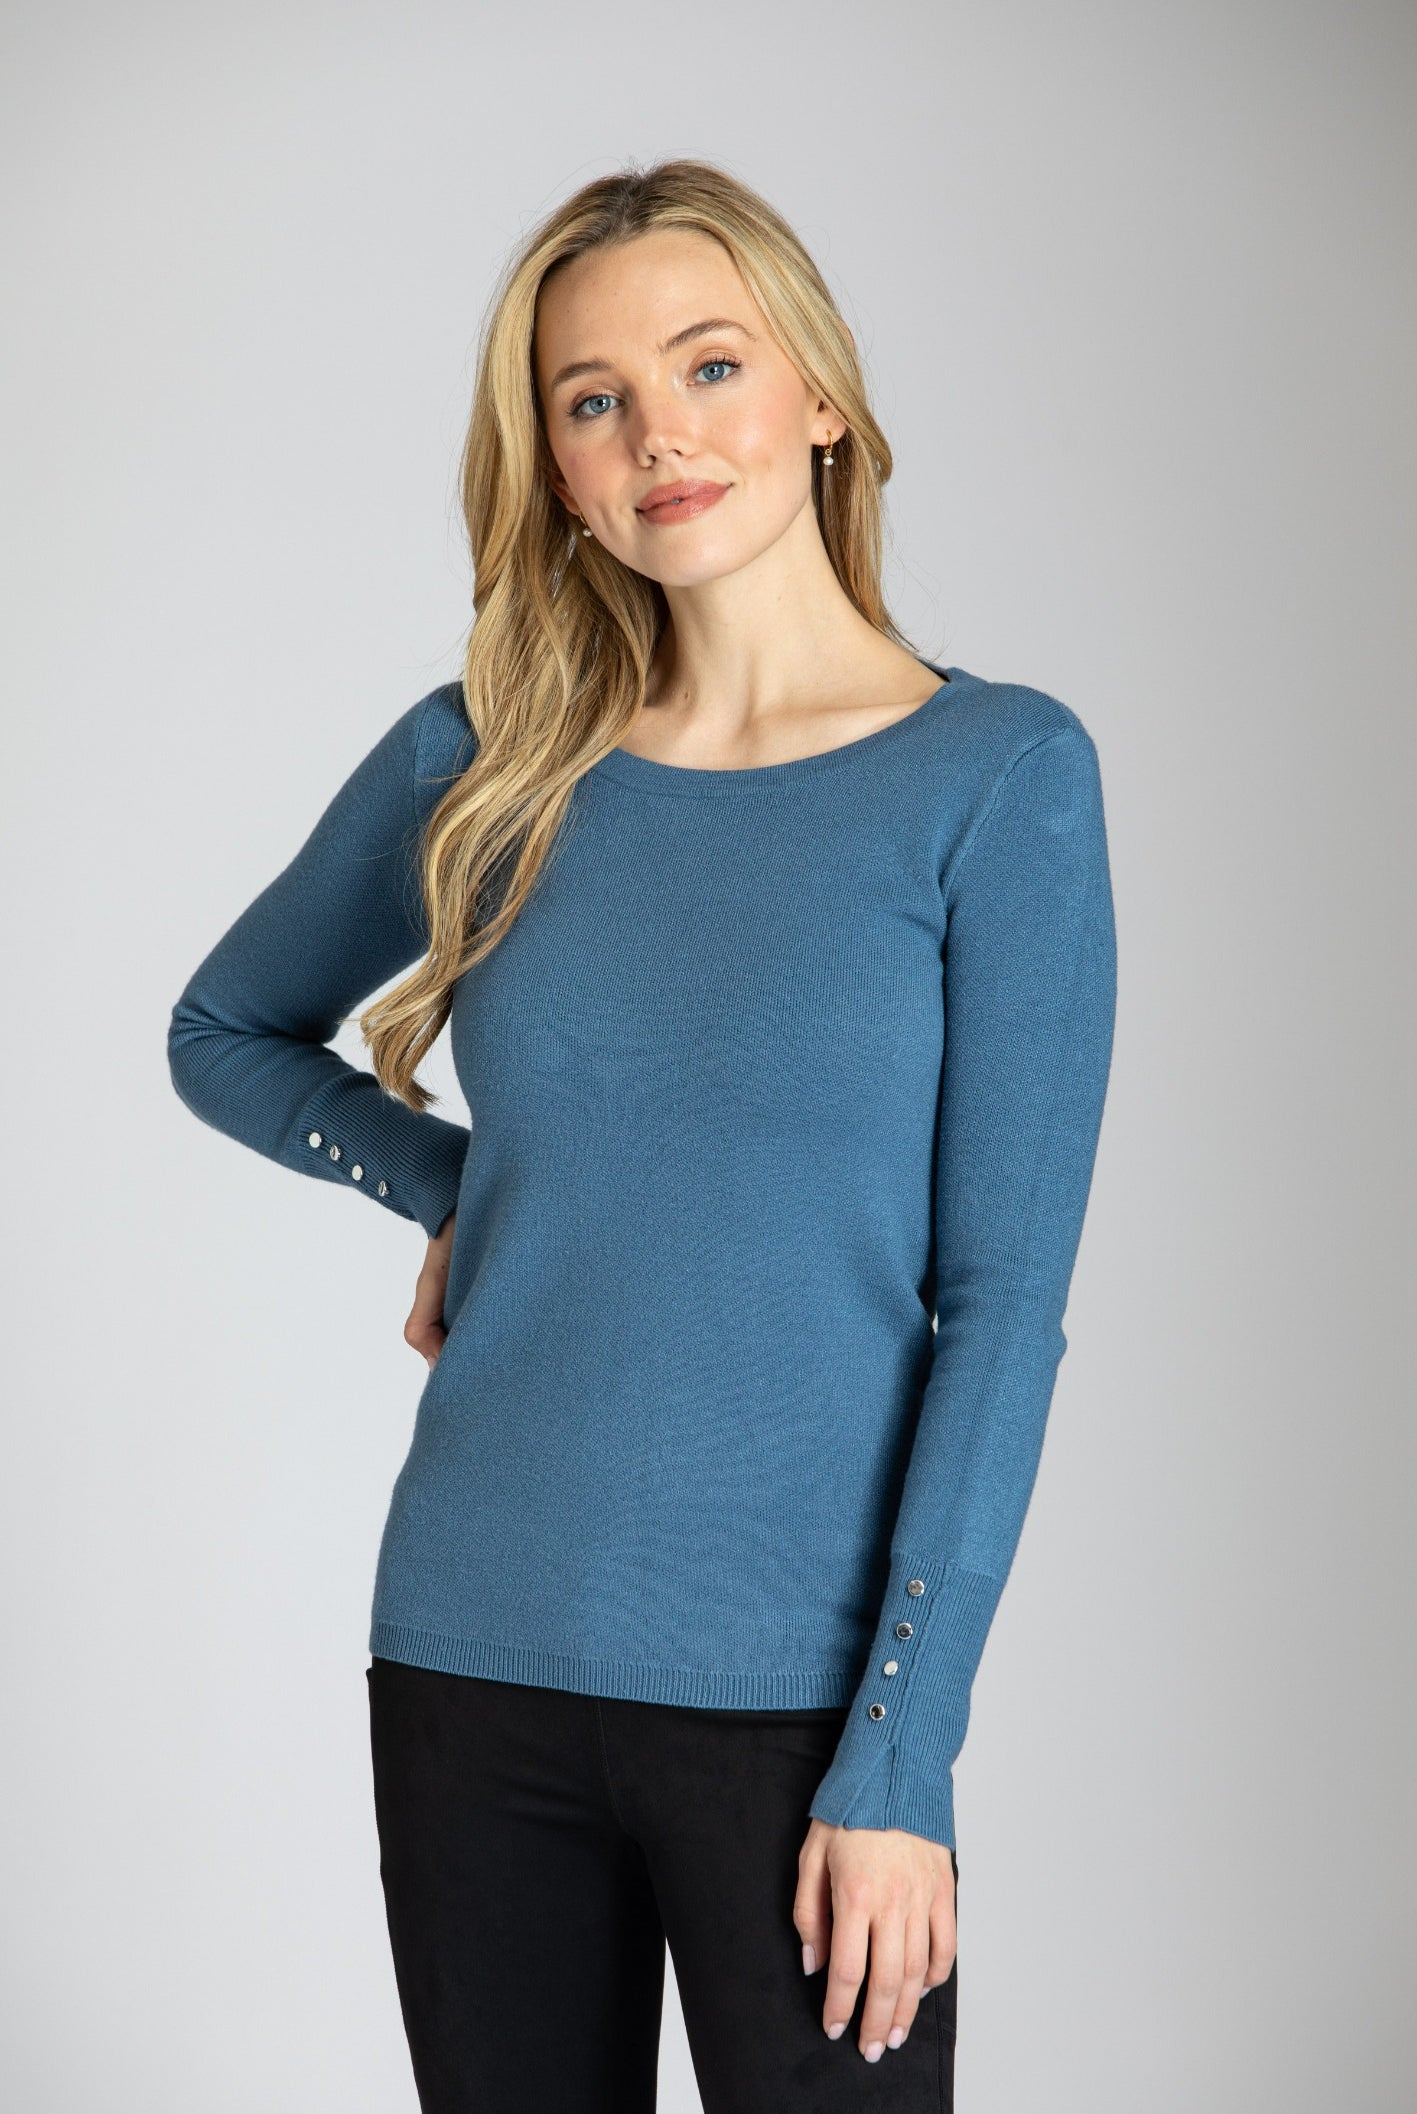 Long Sleeve Crew With Sleeve Button Detail APNY